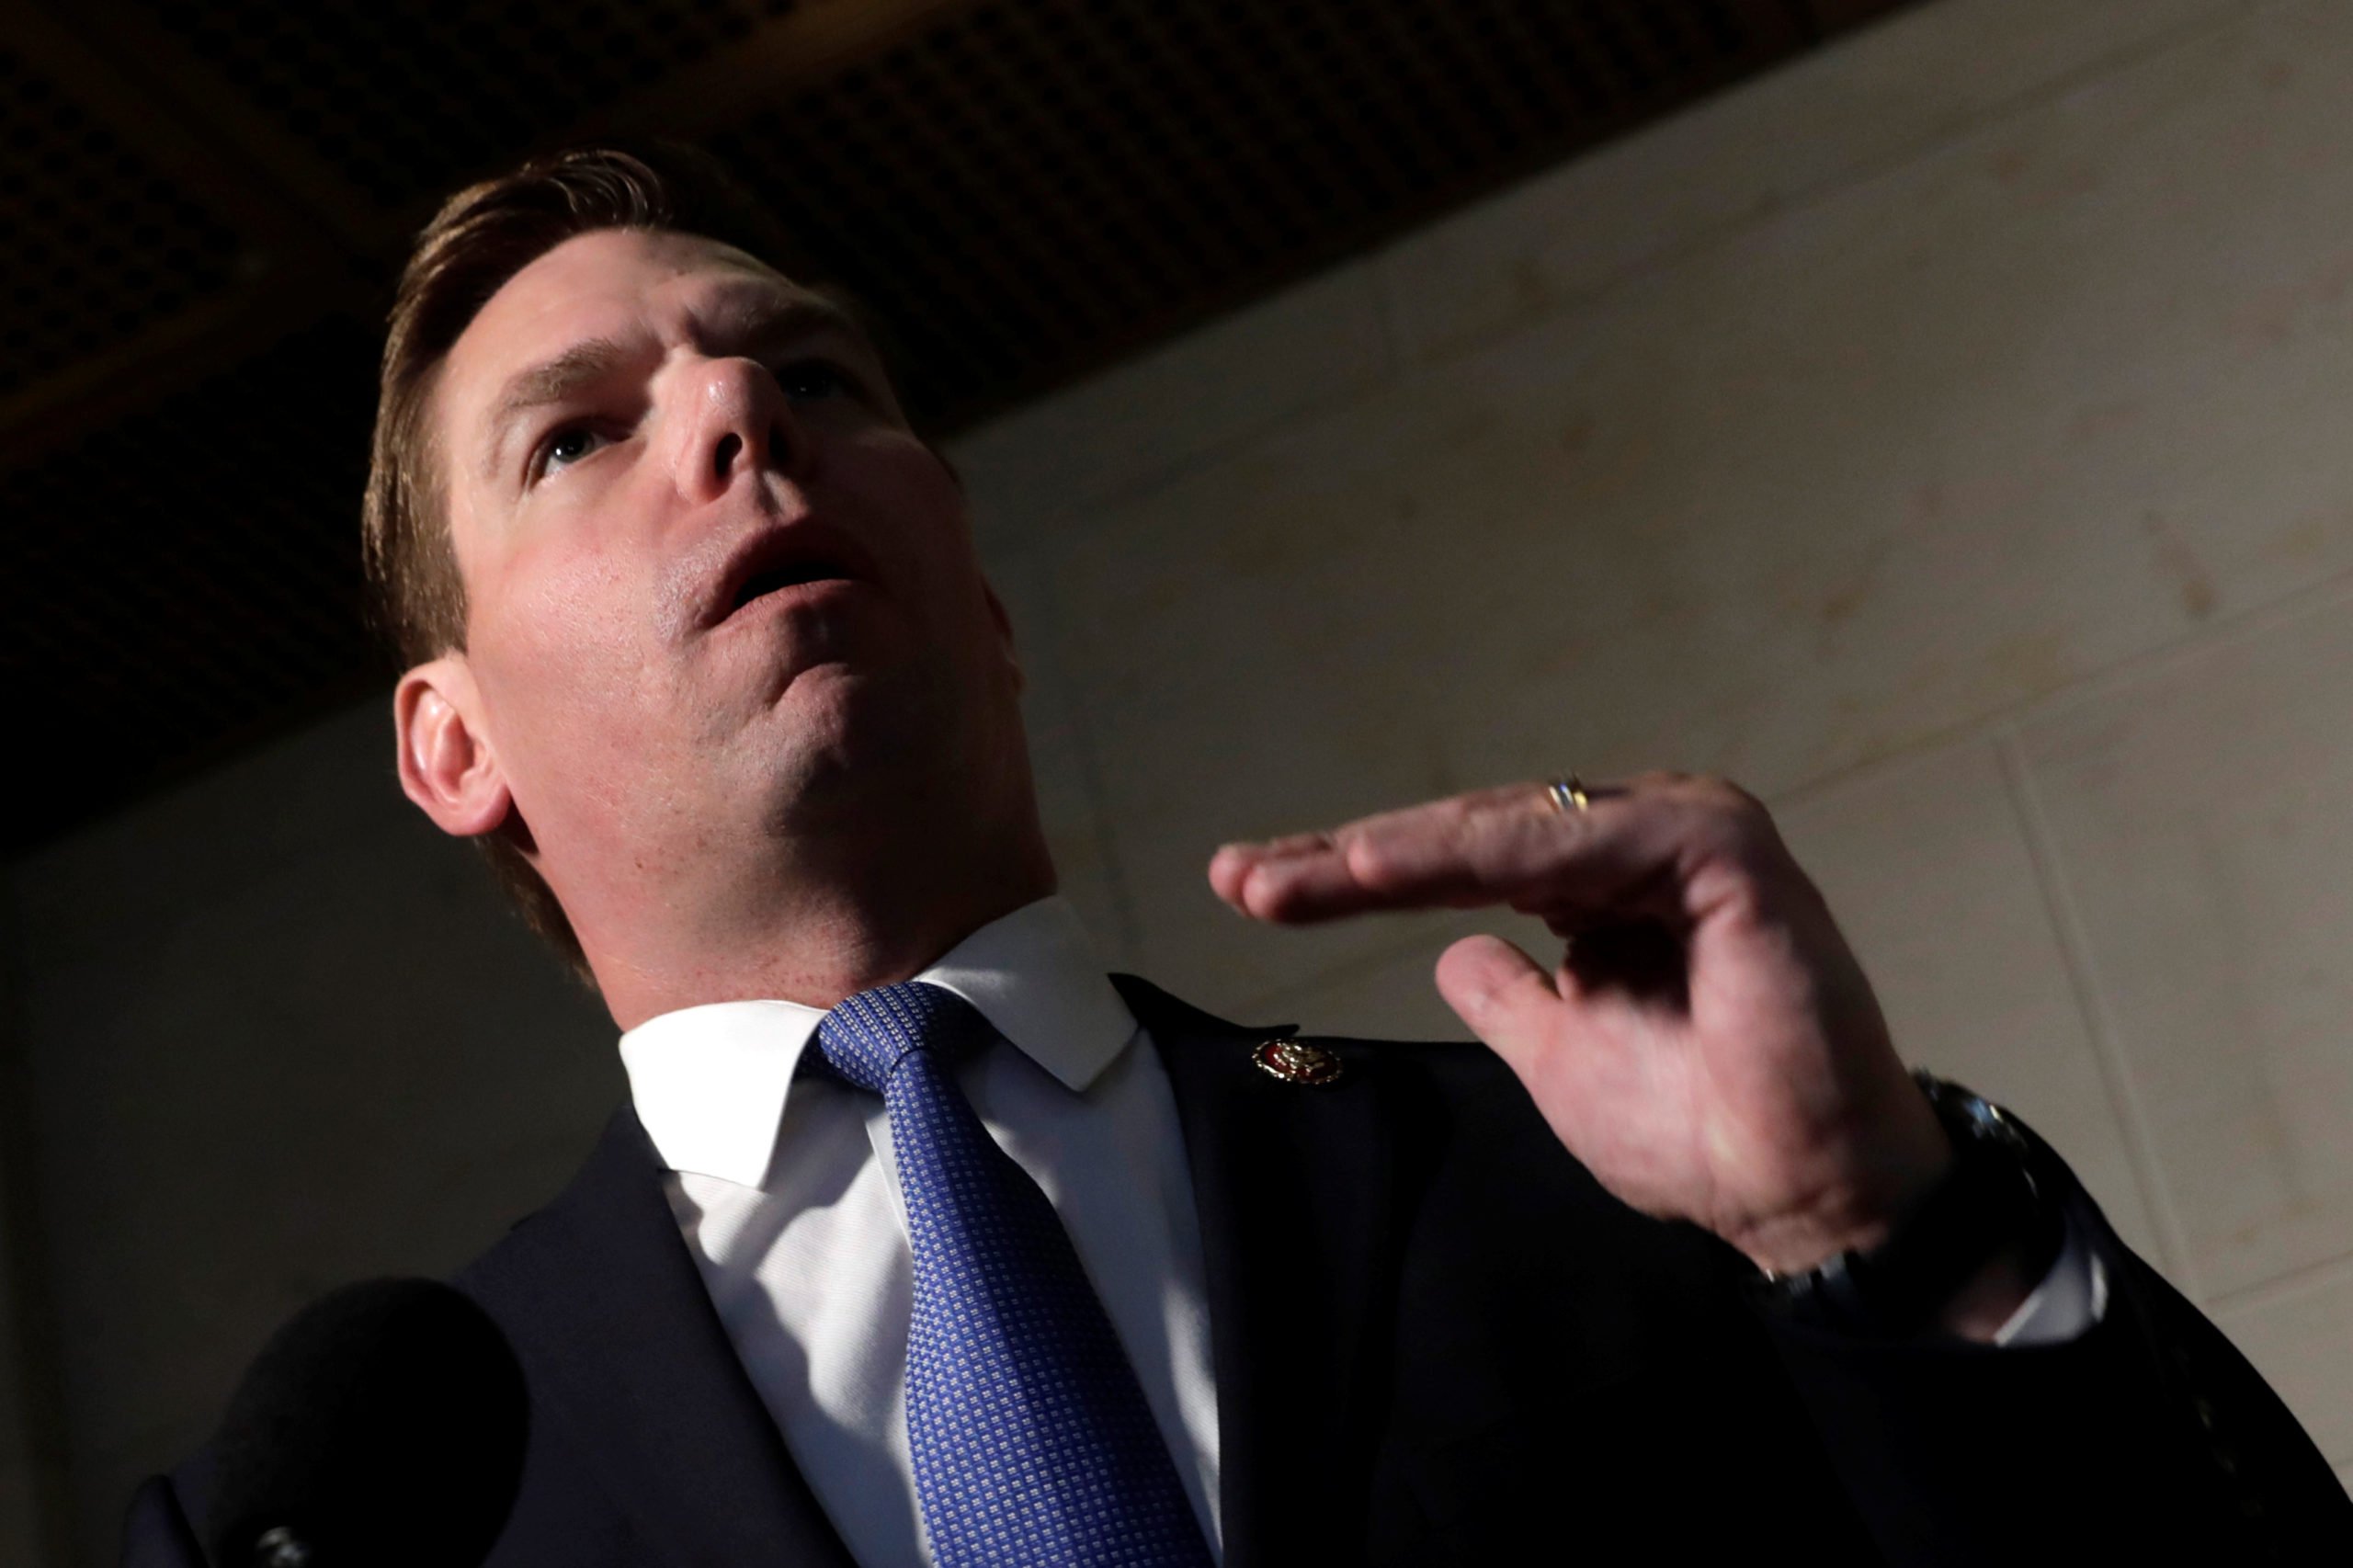 Congressman Eric Swalwell (D-CA) talks to reporters outside a secure area as Deputy Assistant Secretary of Defense Laura Cooper testifies in a closed-door deposition as part of the U.S. House of Representatives impeachment inquiry into U.S. President Donald Trump on Capitol Hill in Washington, U.S., October 23, 2019. REUTERS/Yuri Gripas